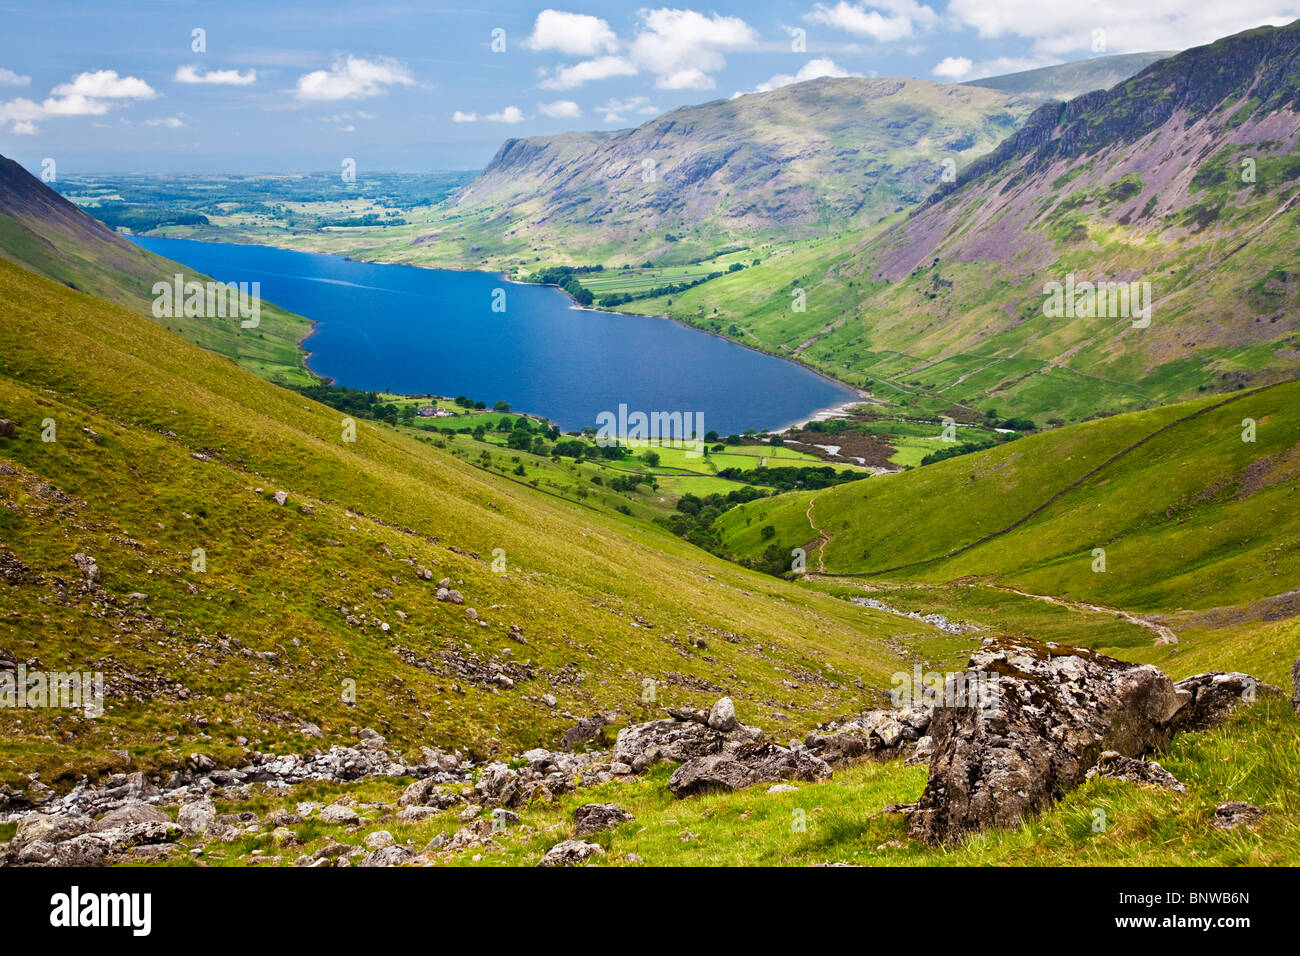 View over Wast Water from the Wasdale Head route up to Scafell Pike, Lake District, Cumbria, England, UK Stock Photo